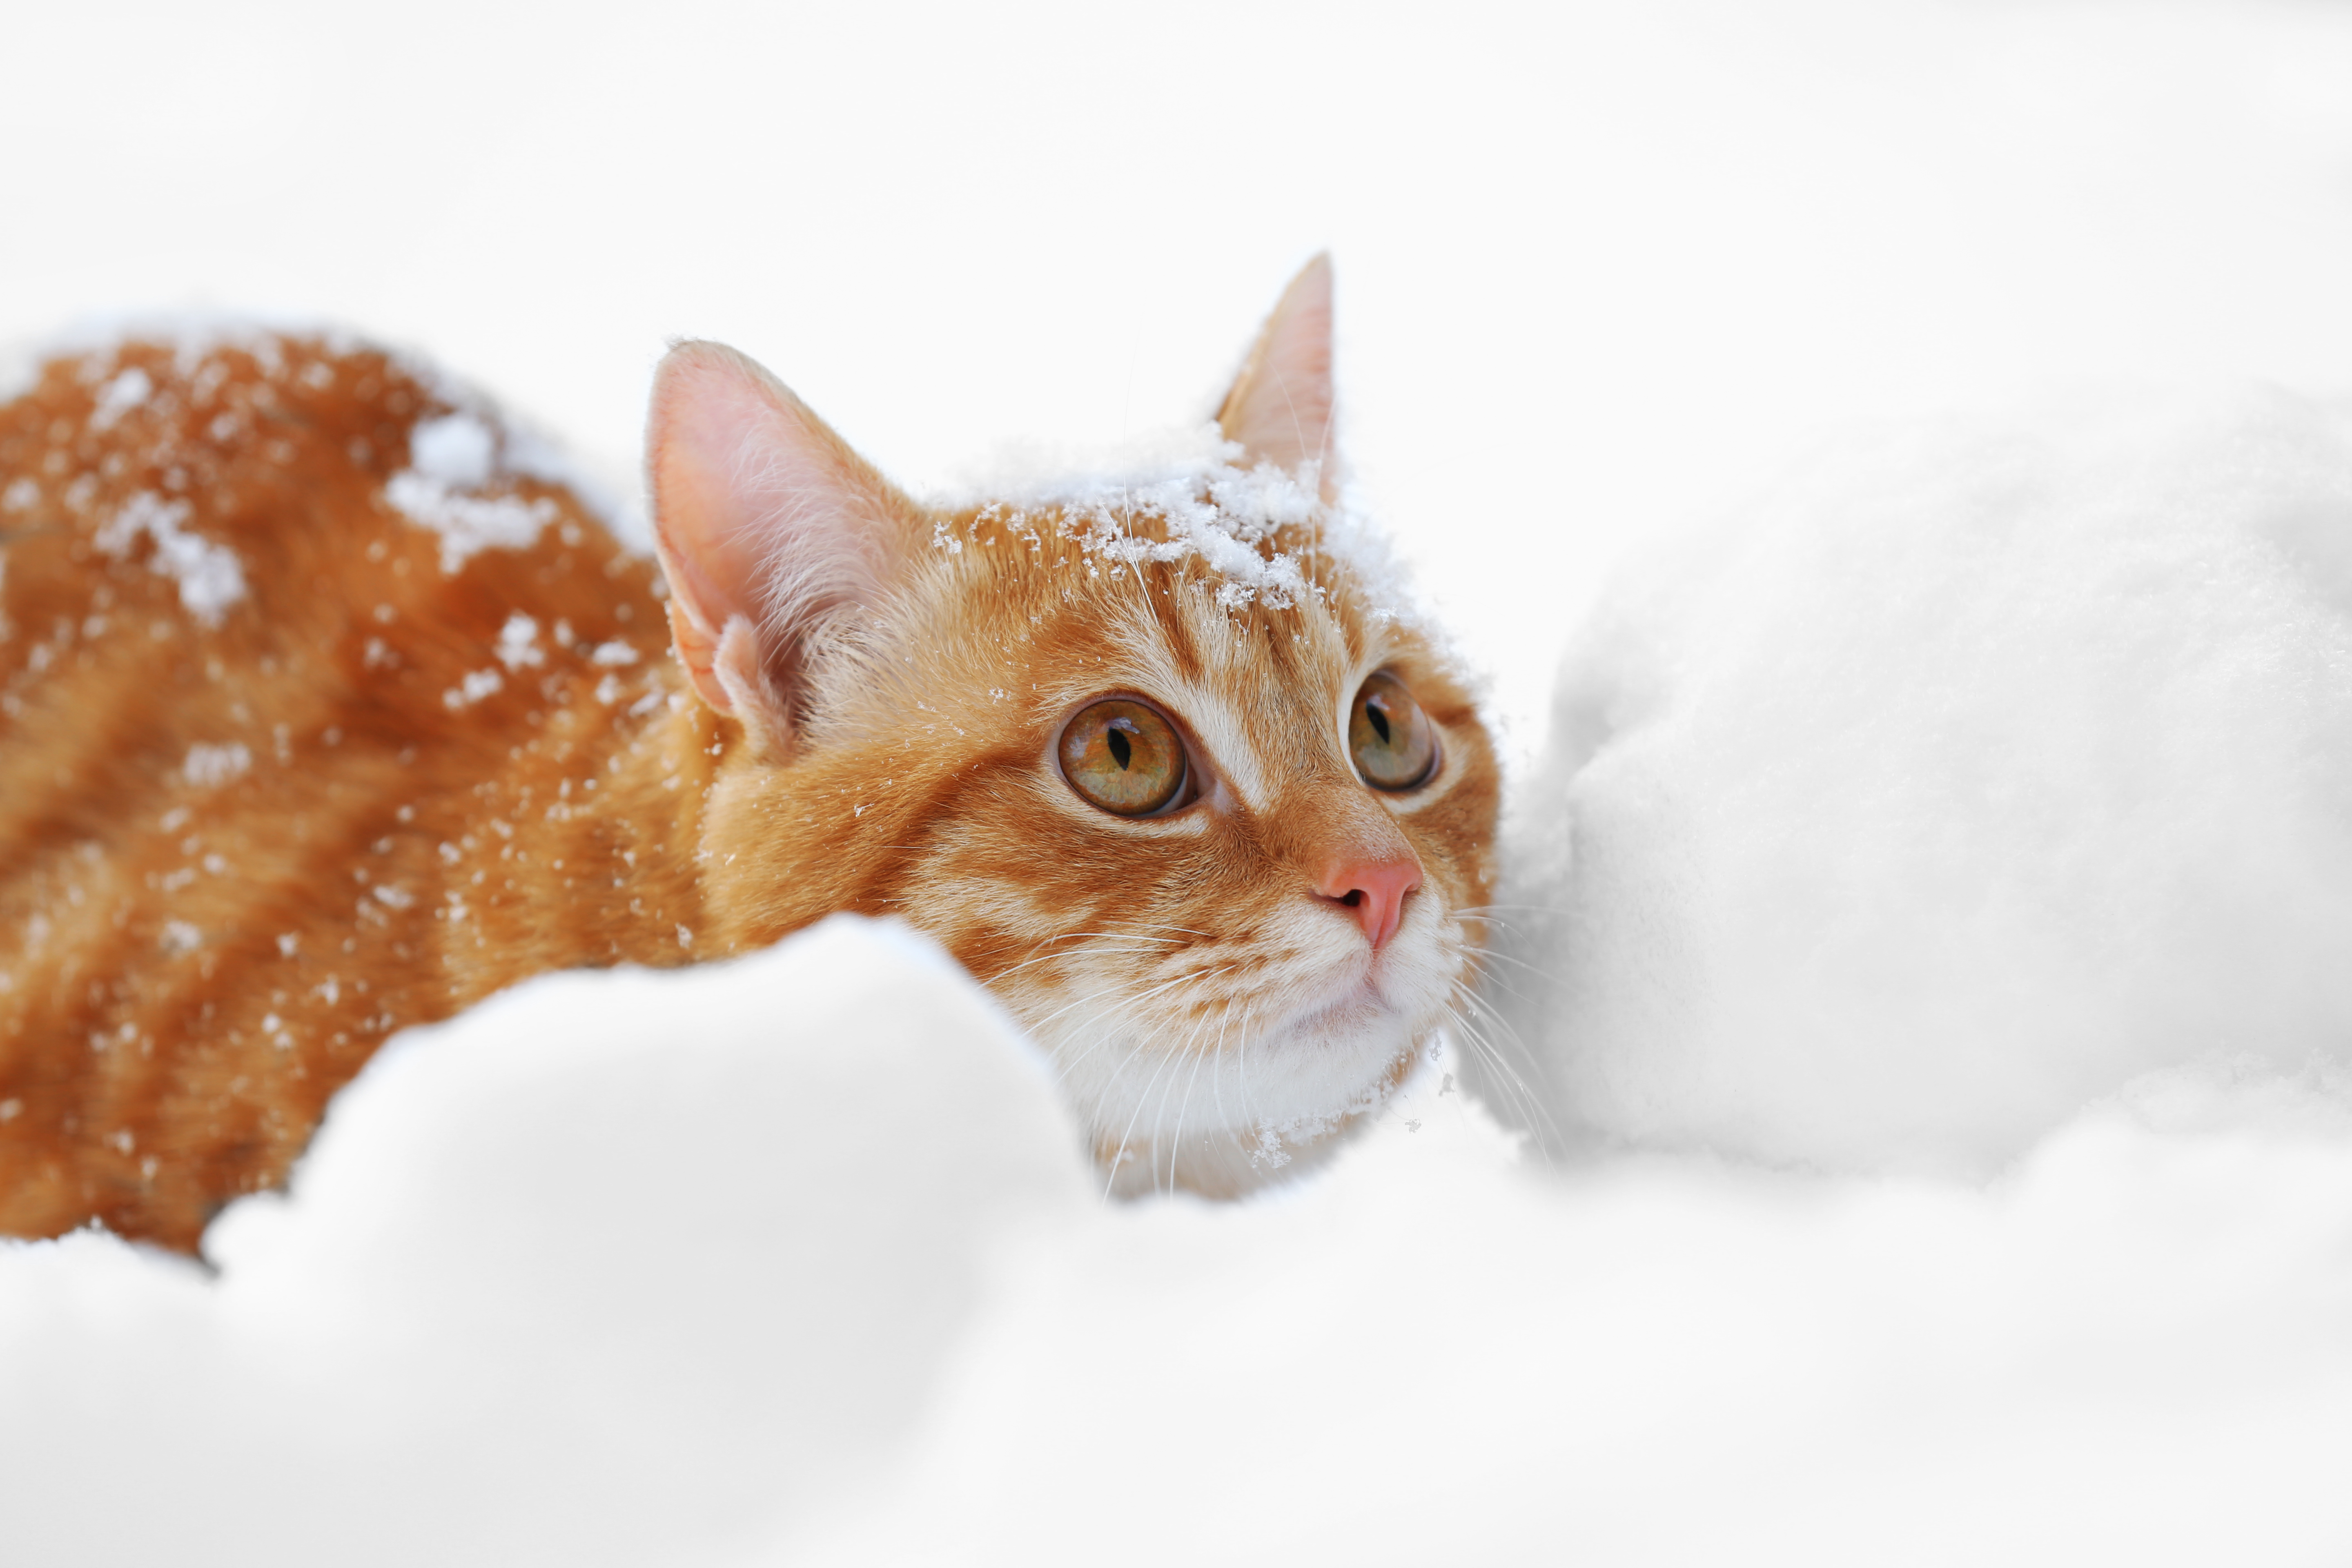 How to Provide Proper Winter Care for Your Outdoor Cat